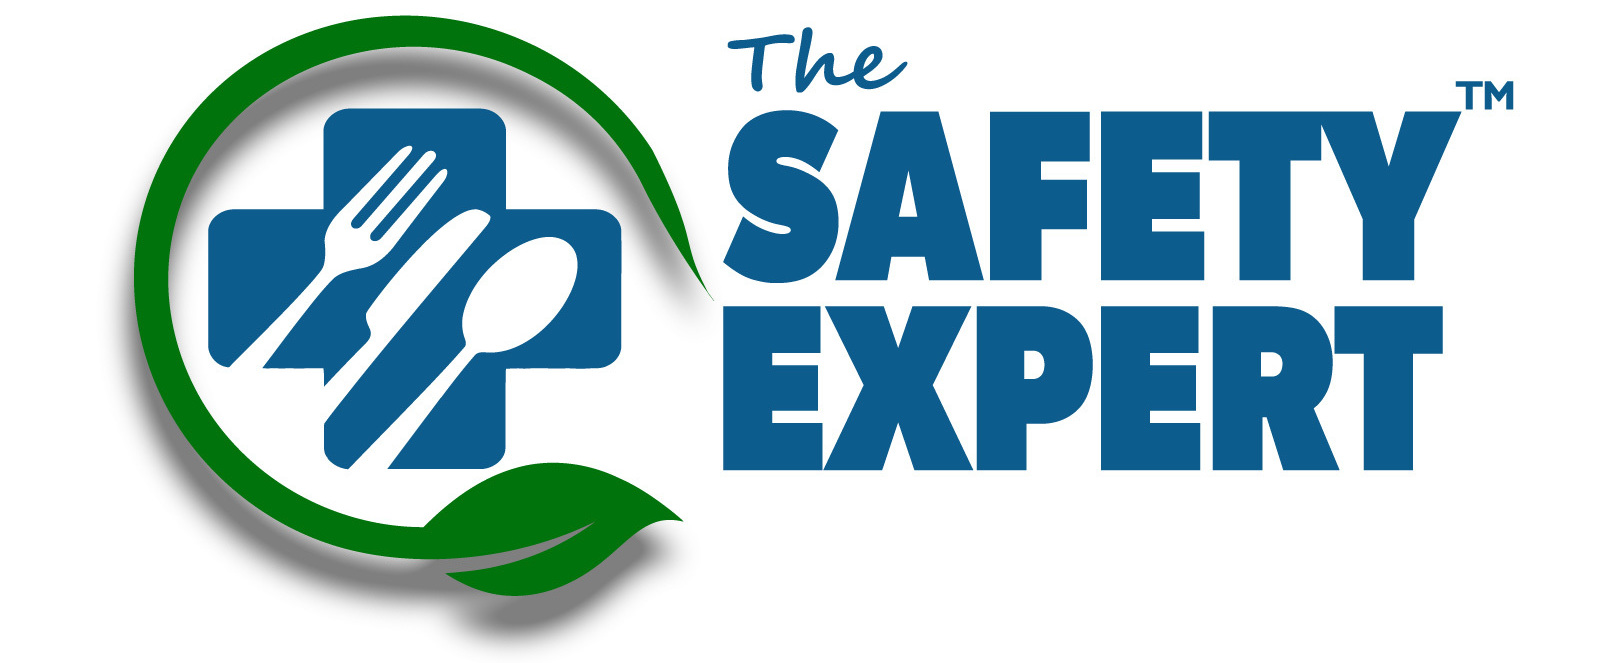 The Safety Expert Social Media Support London